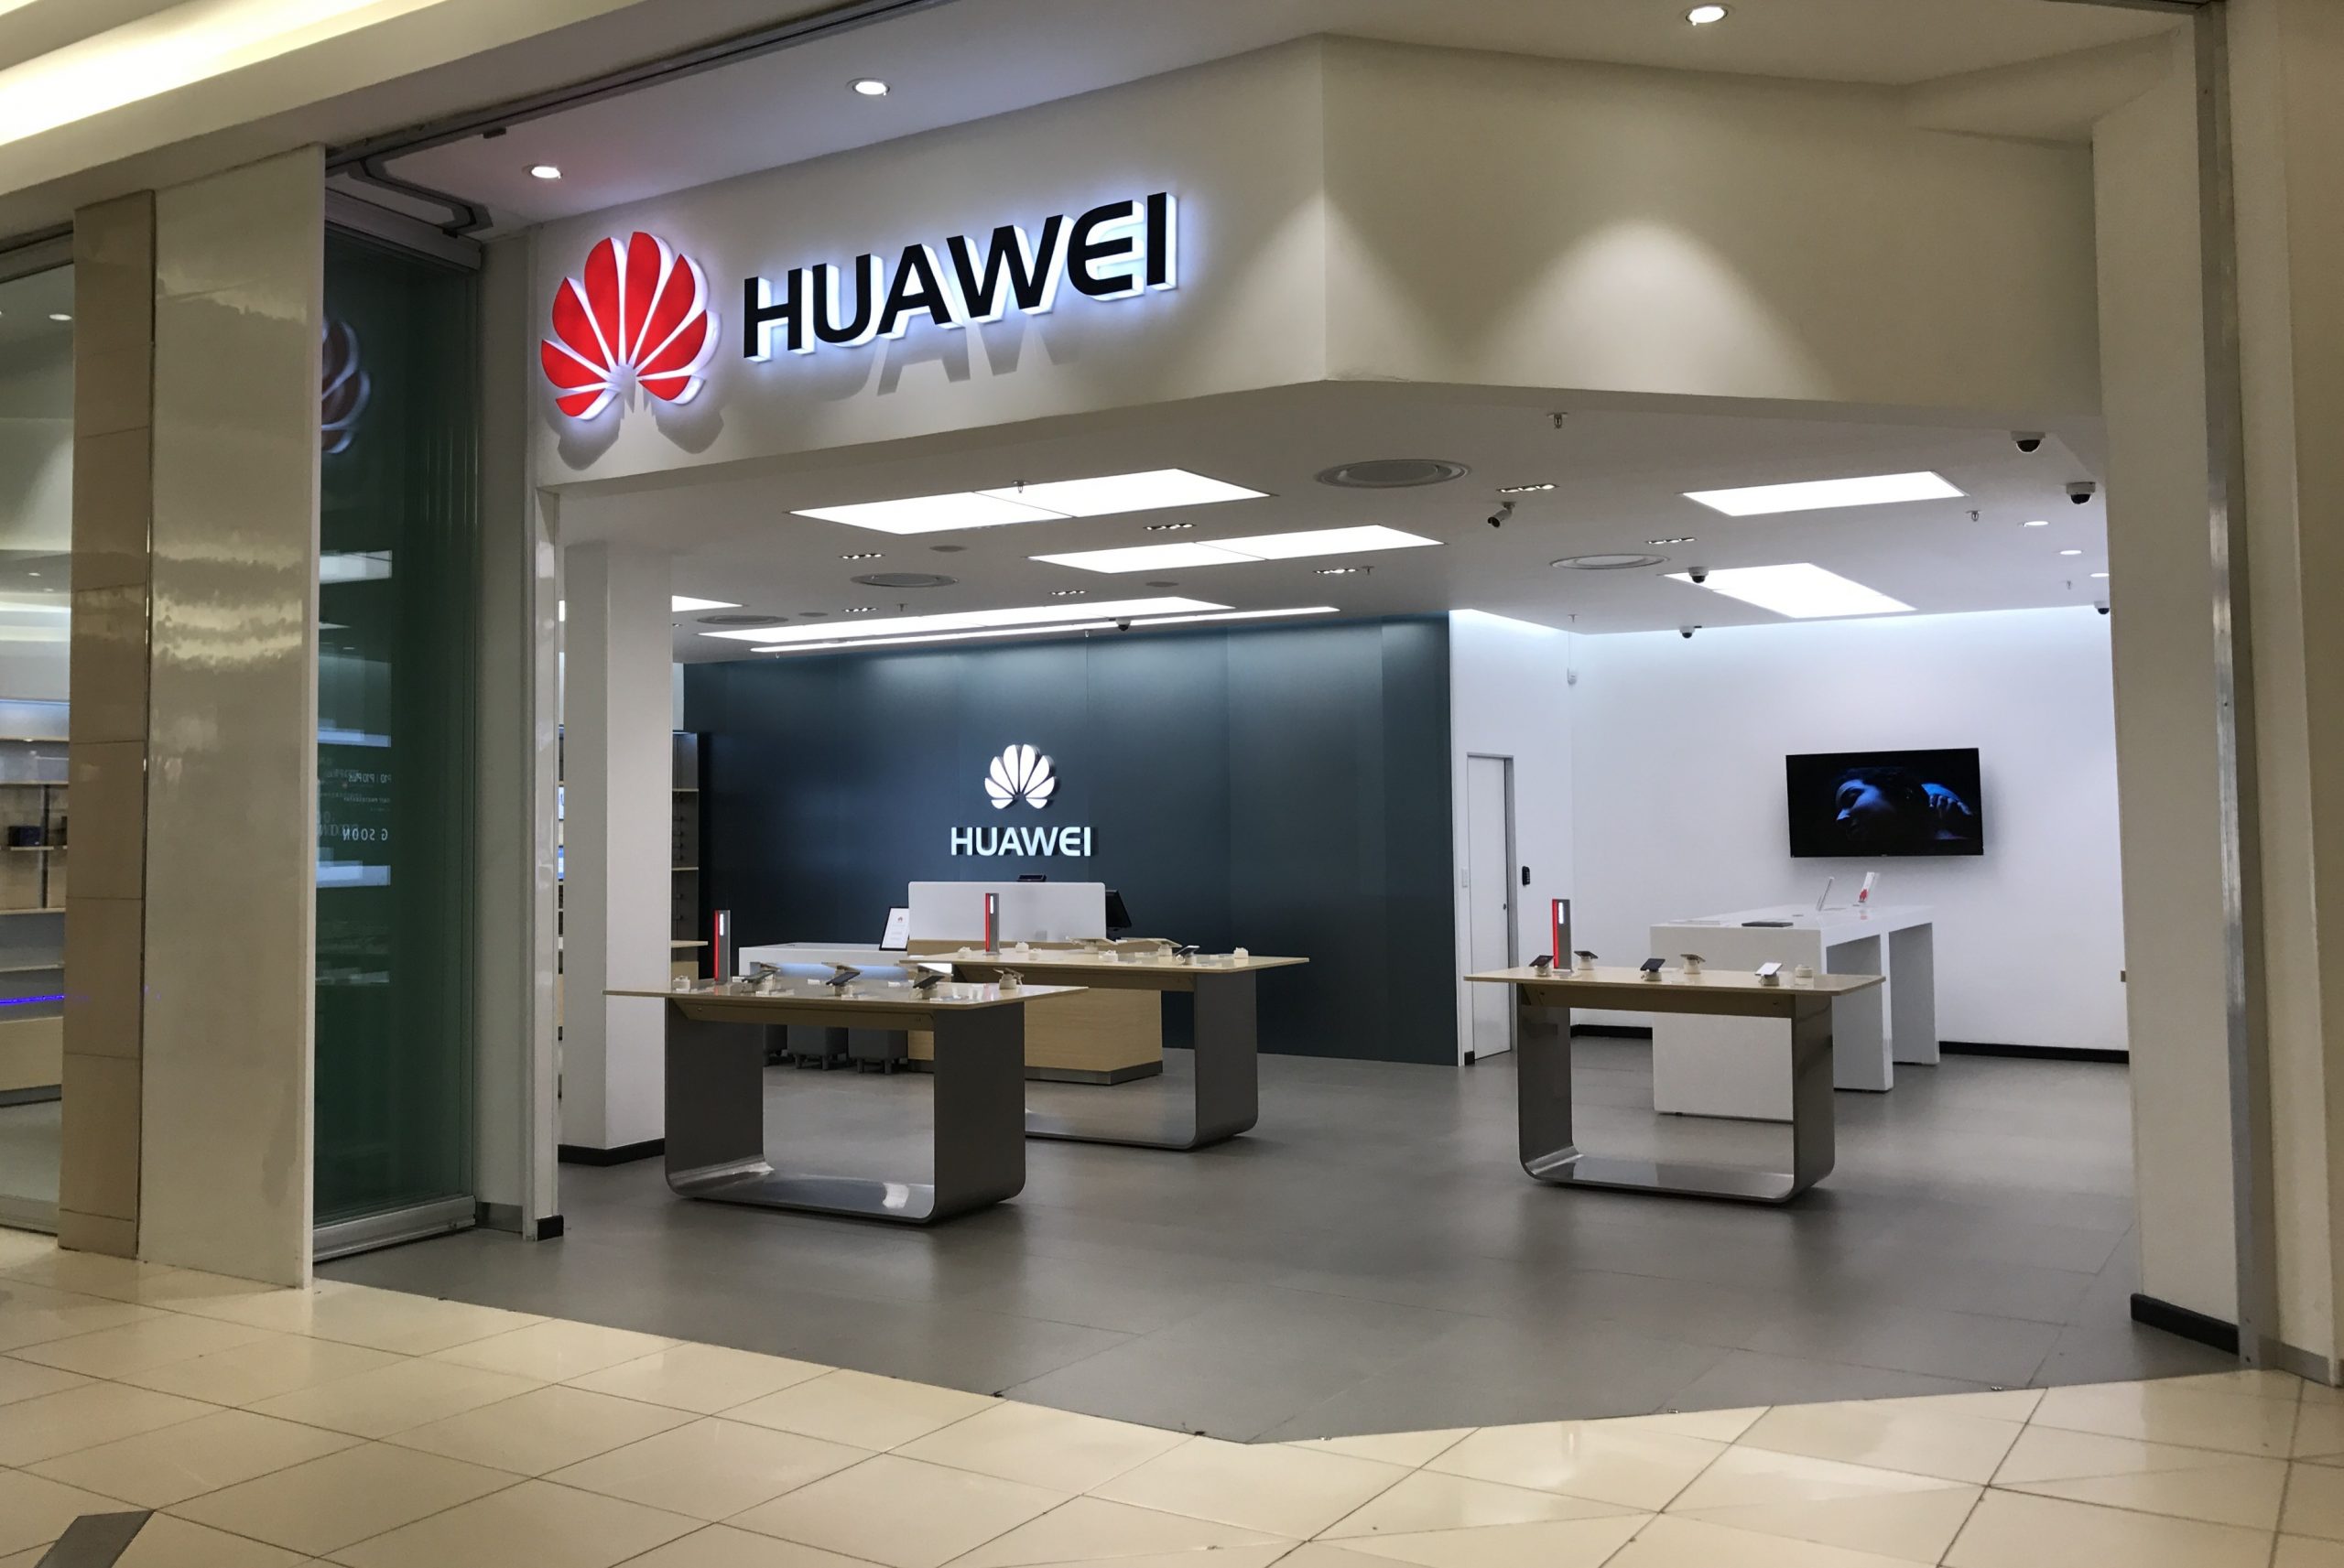 Media: Huawei has resumed the supply of smartphones and other gadgets to Russia. Huawei itself is still silent